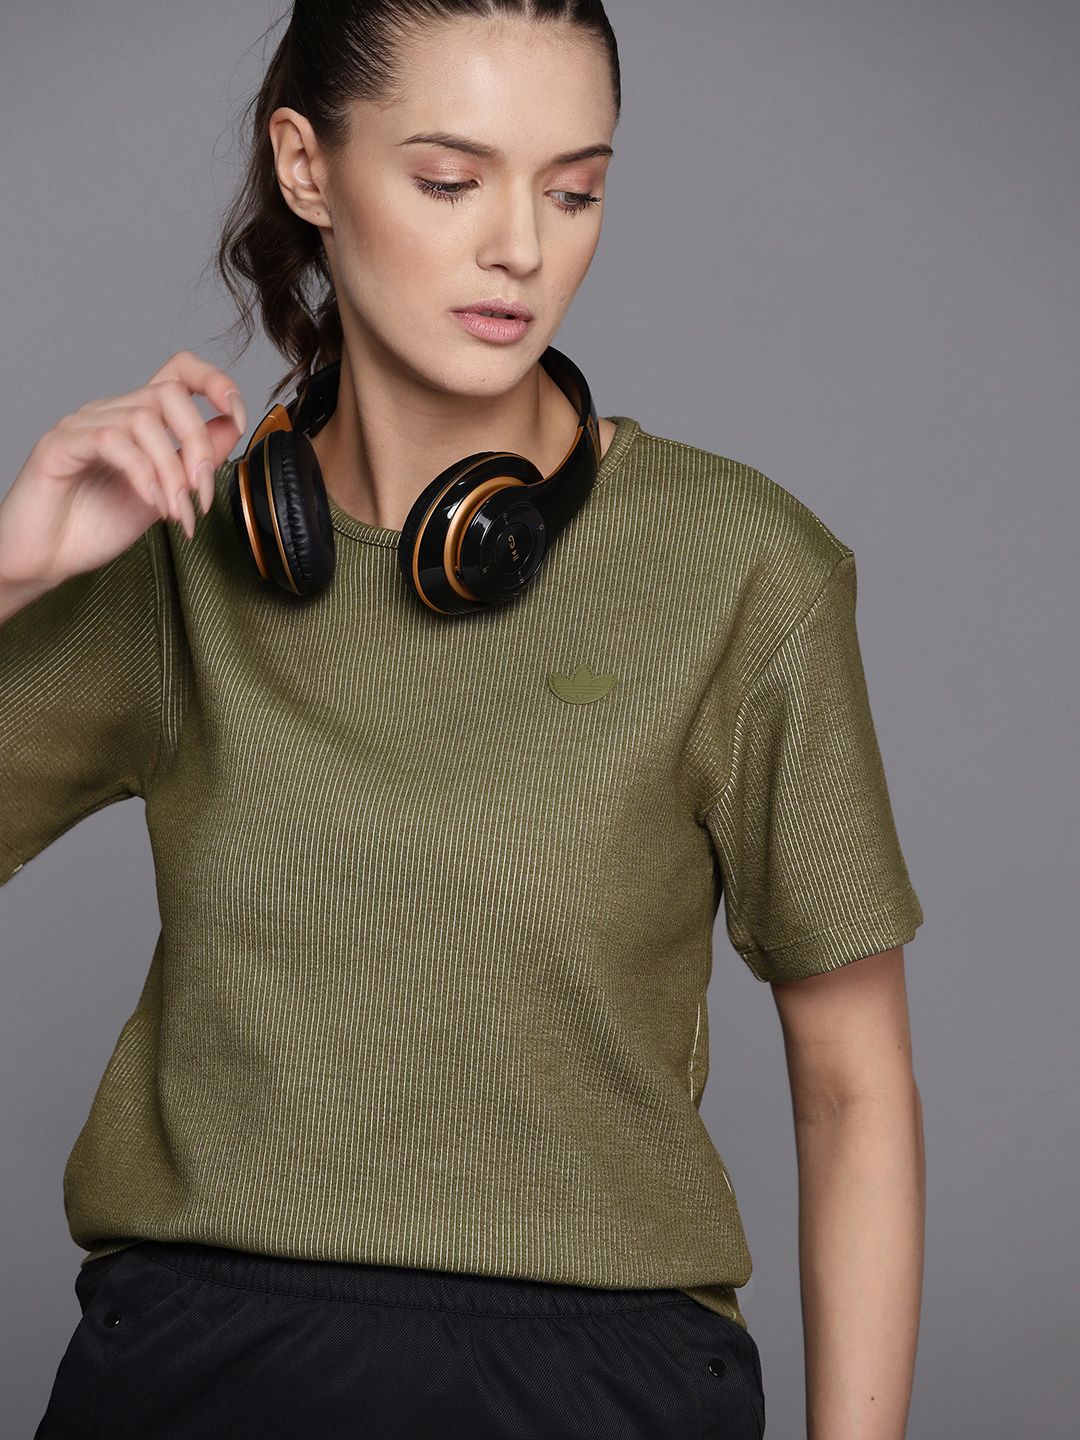 ADIDAS Originals Women Olive Green Solid T-shirt Price in India